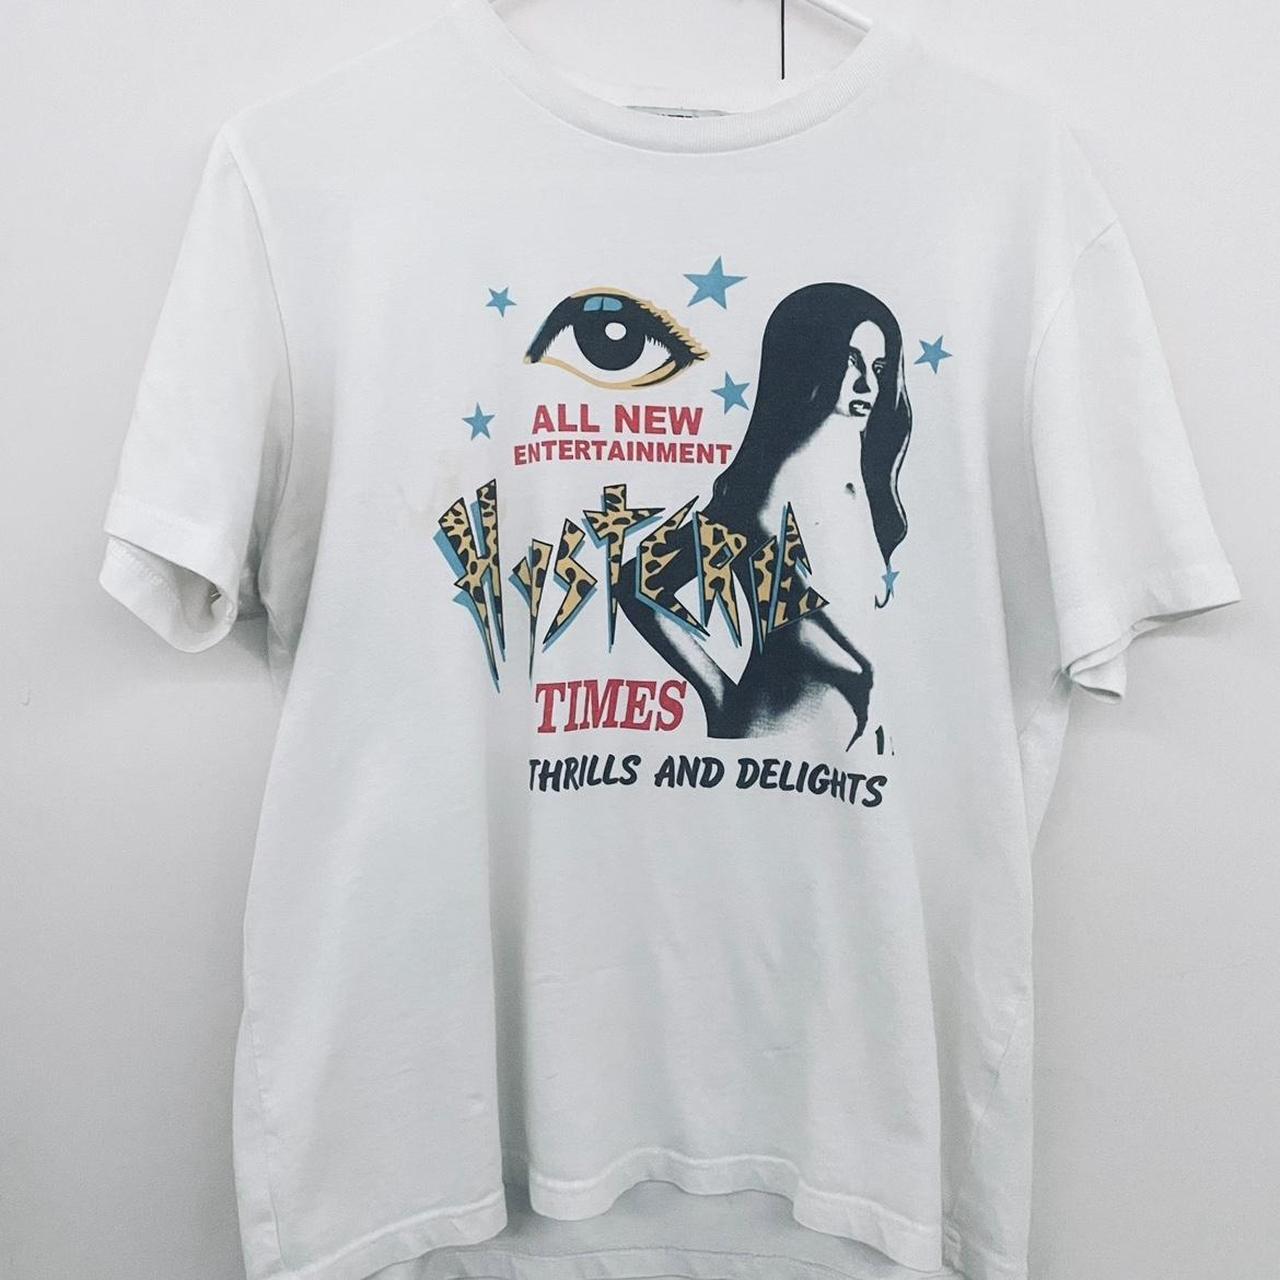 Hysteric Glamour Tee, Good condition, has a small...